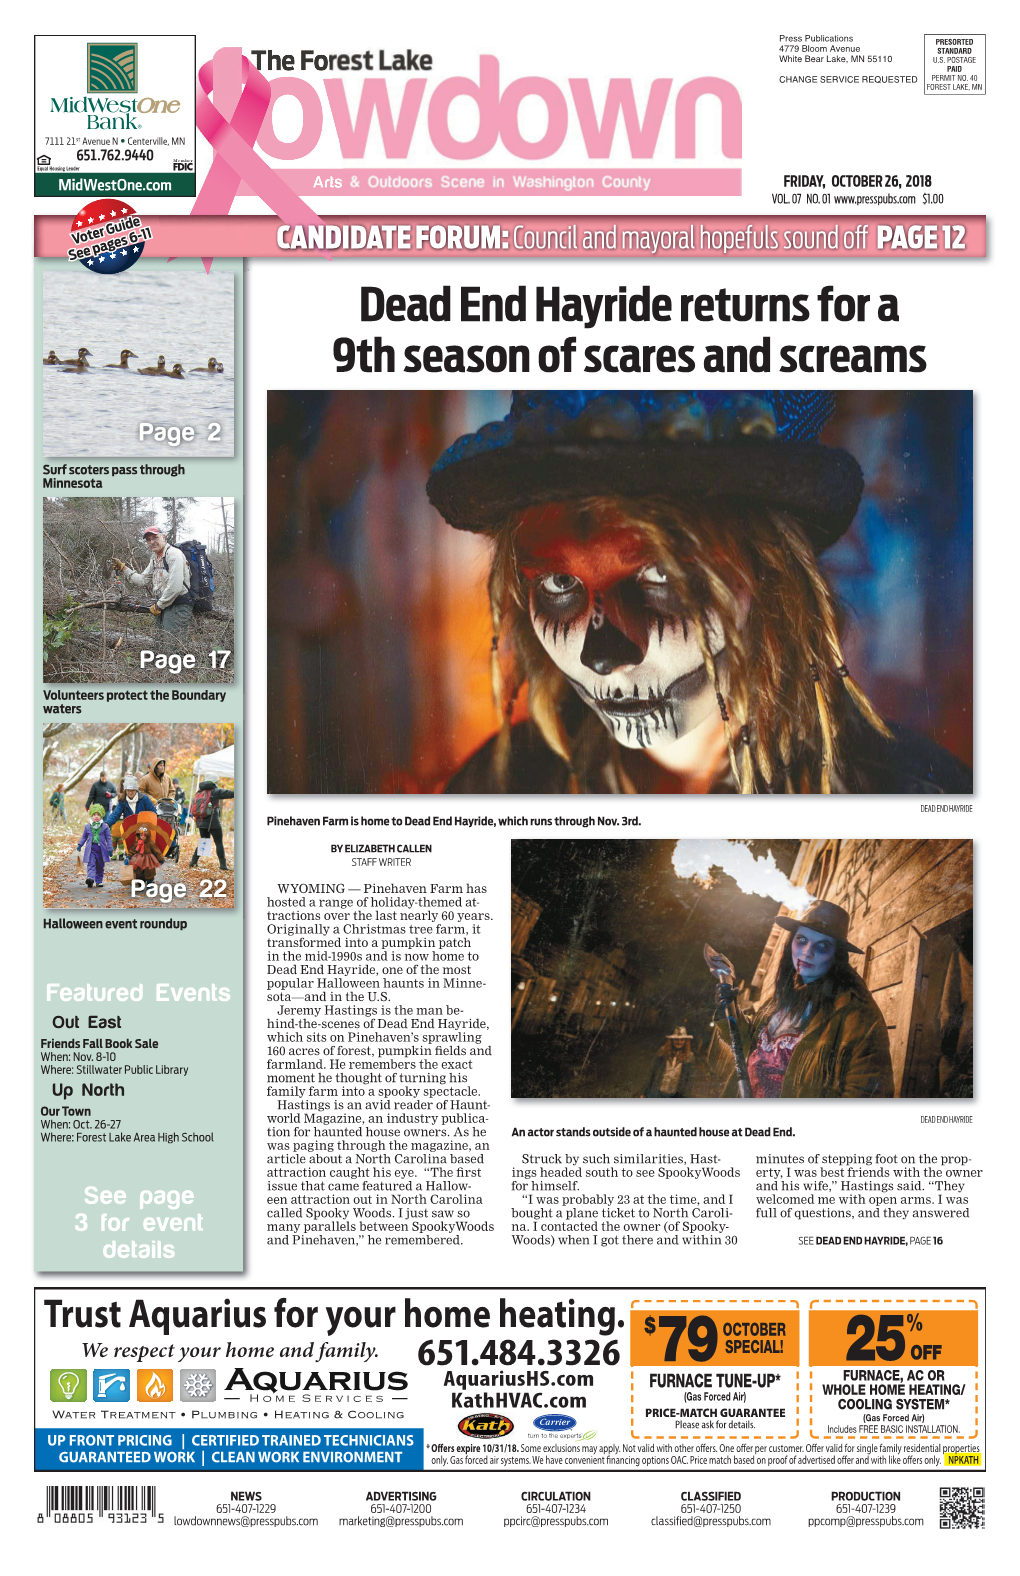 Dead End Hayride Returns for a 9Th Season of Scares and Screams